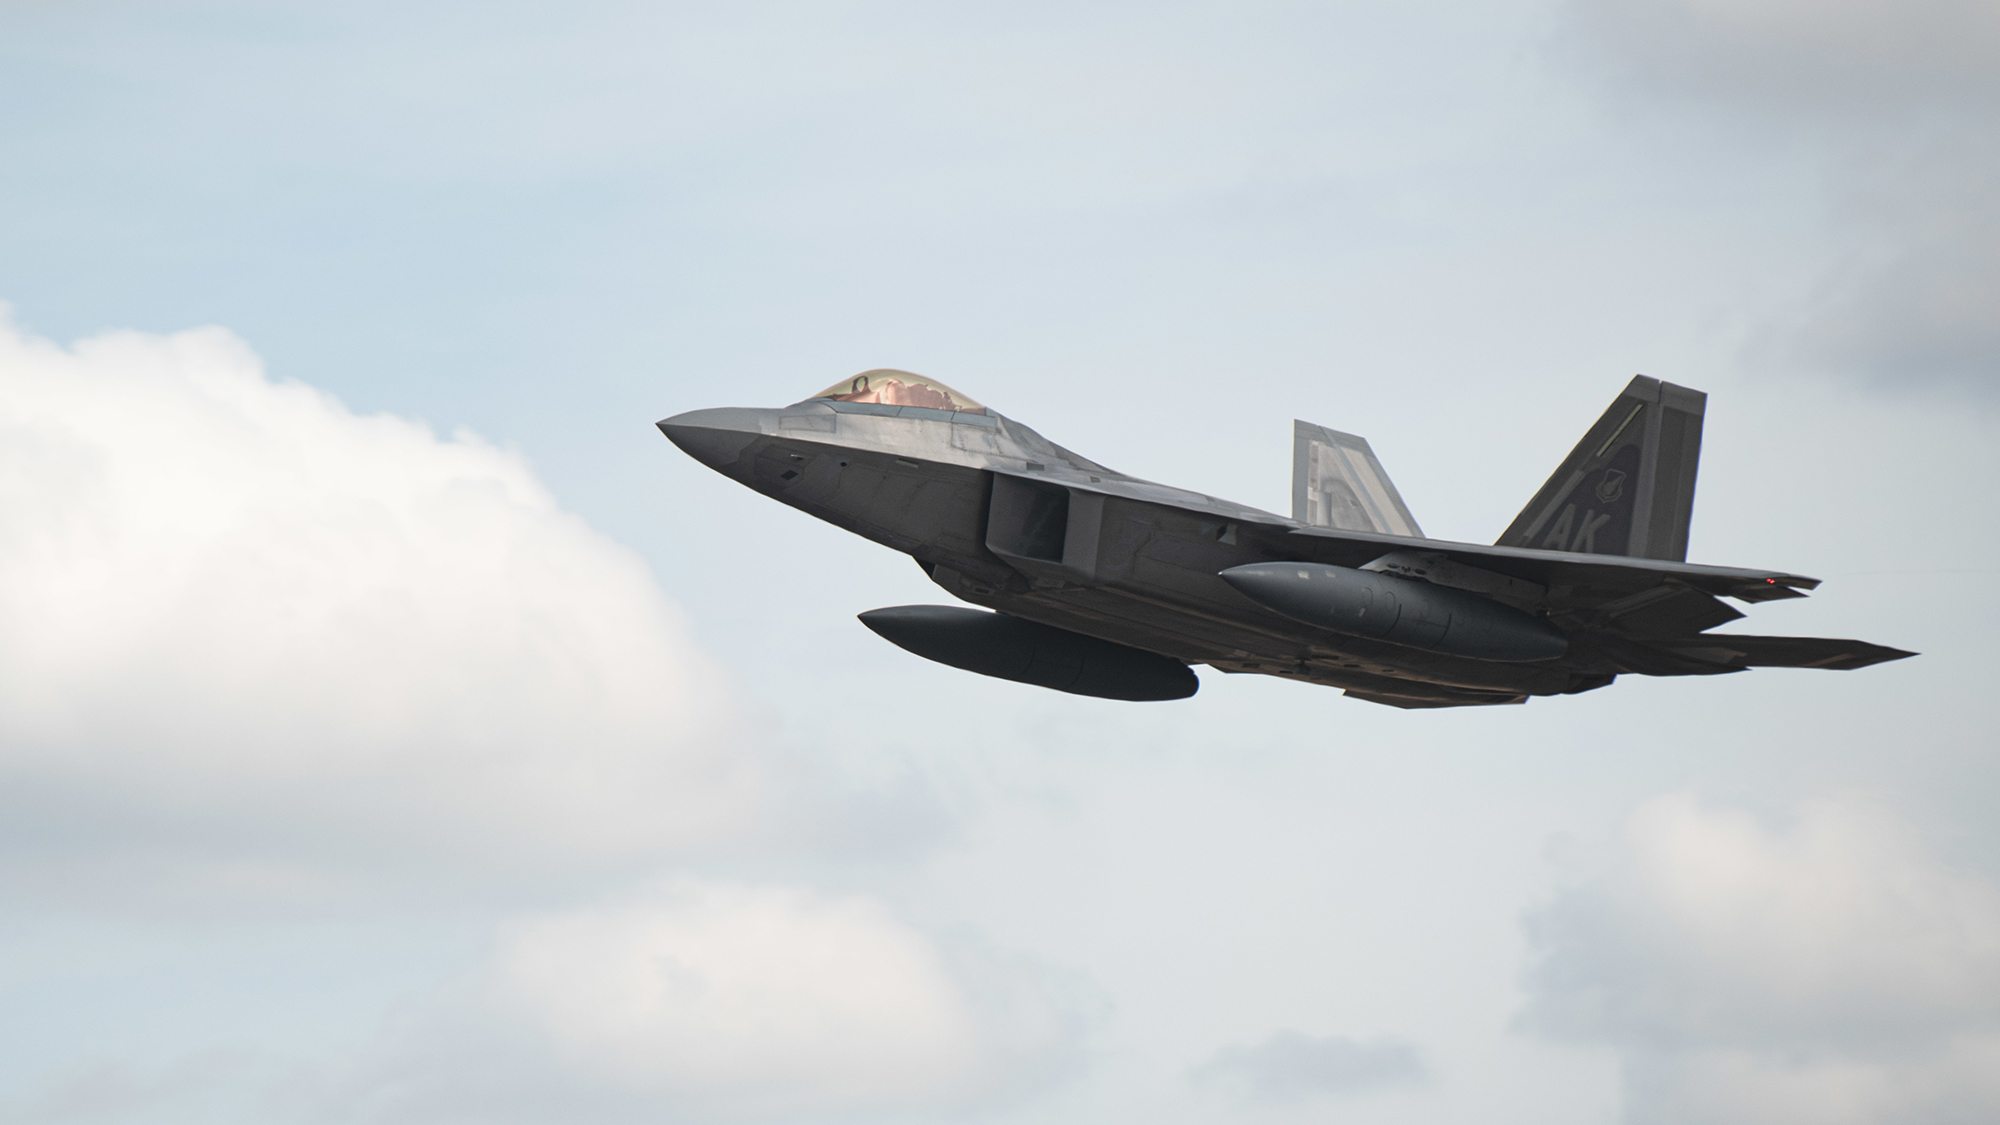 On February 10, an unidentified object was shot down in Alaska airspace by a US F-22. This photo from August 2022 shows a similar F-22 Raptor taking off from Royal Air Force Lakenheath, England. 